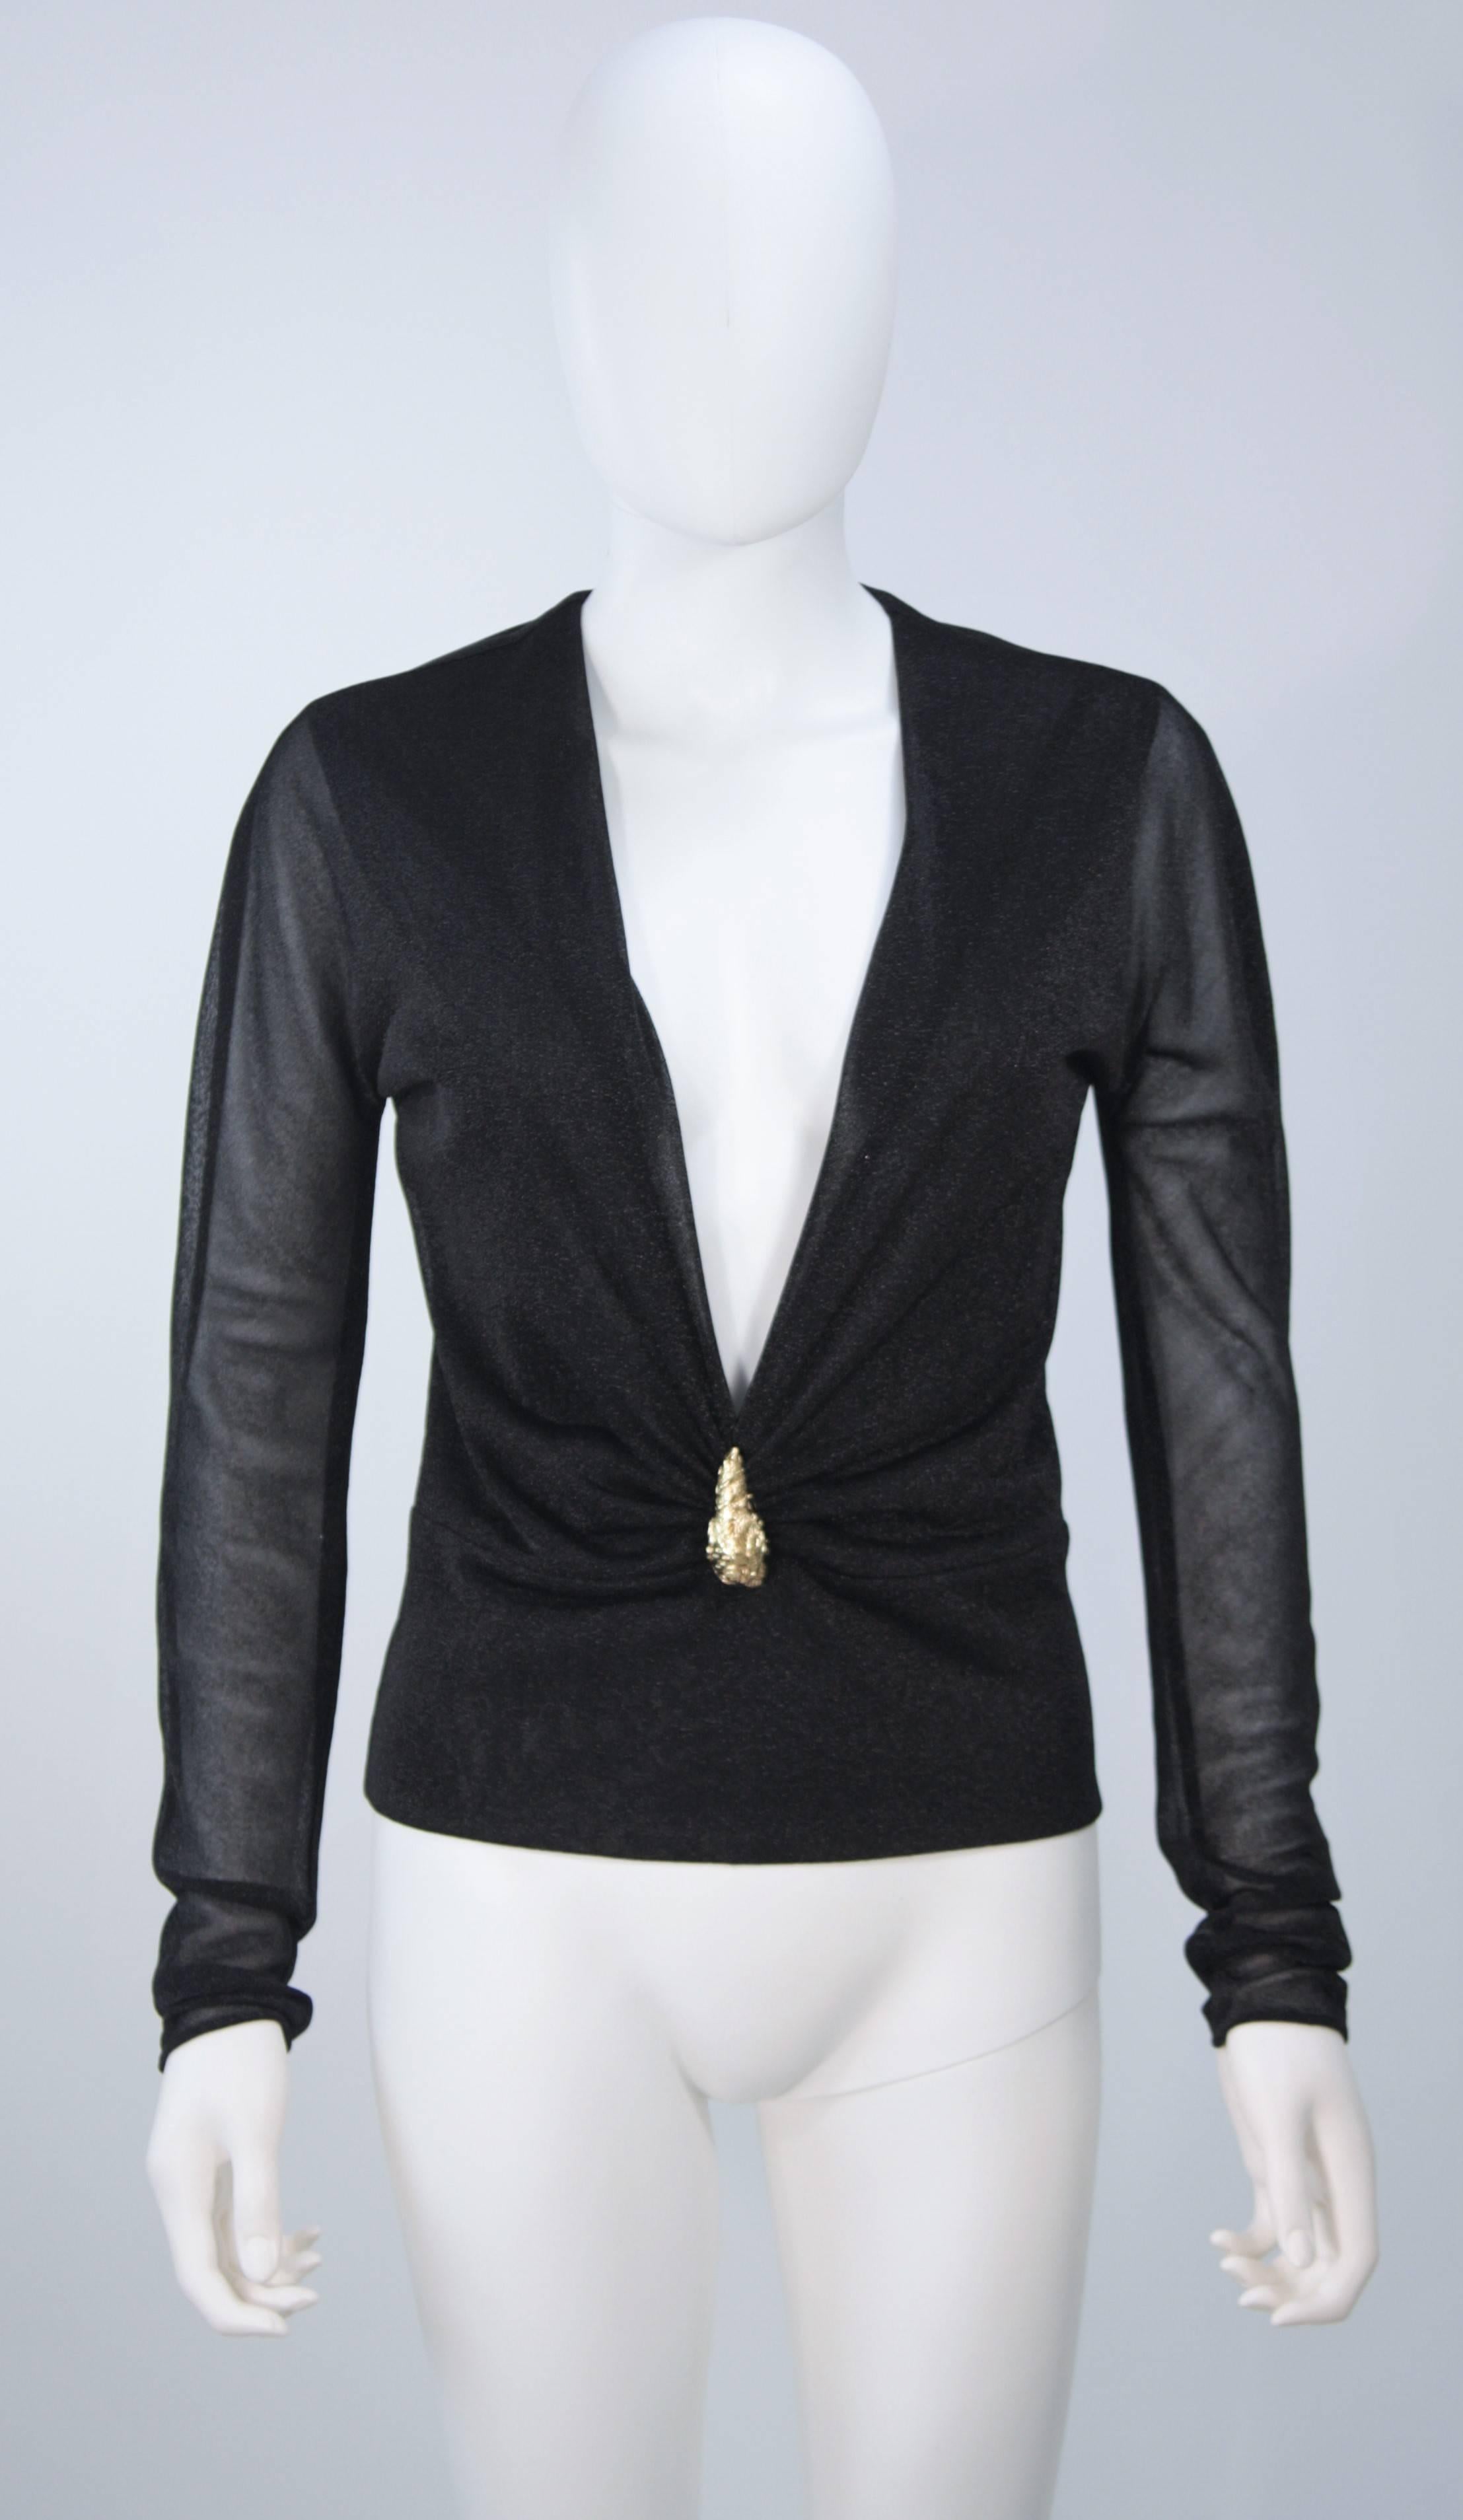 This Gucci blouse is composed of a stretch Lurex in black. Features a plunging neckline with gold lion head hardware. In excellent vintage condition. 

**Please cross-reference measurements for personal accuracy. Size in description box is an